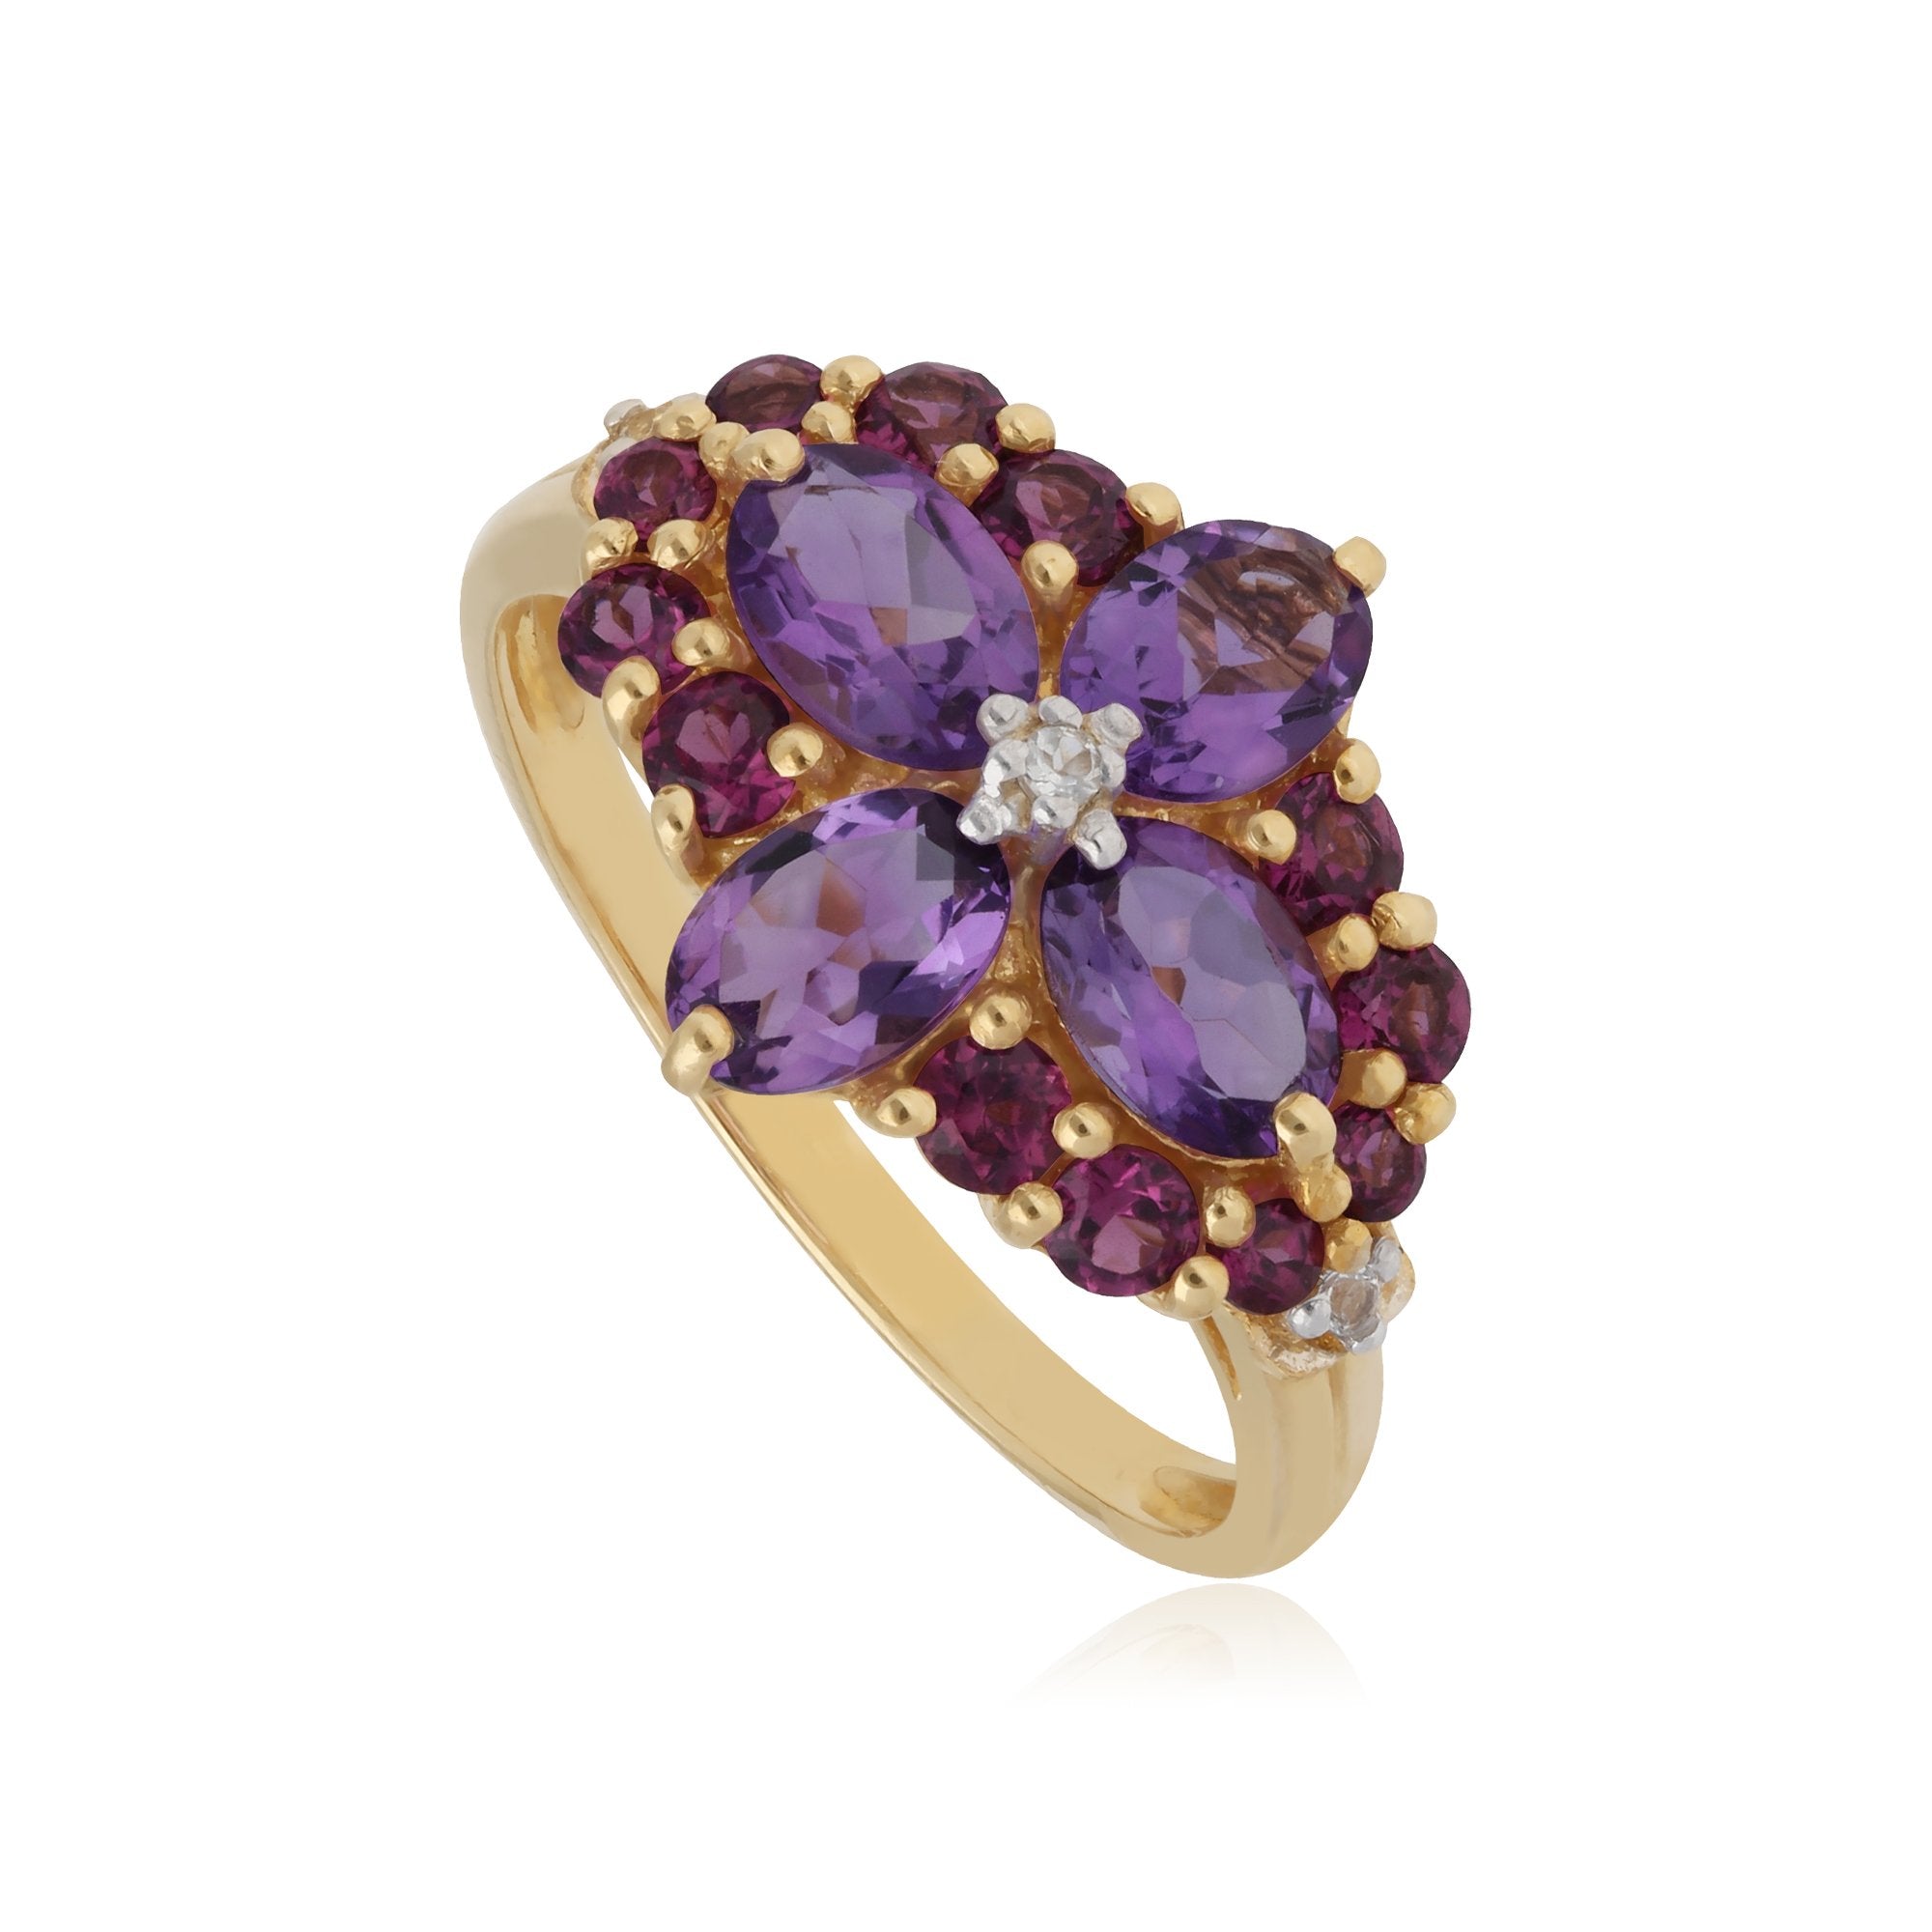 Rhodolite, White Topaz & Amethyst Floral Cocktail Ring in 9ct Yellow Gold